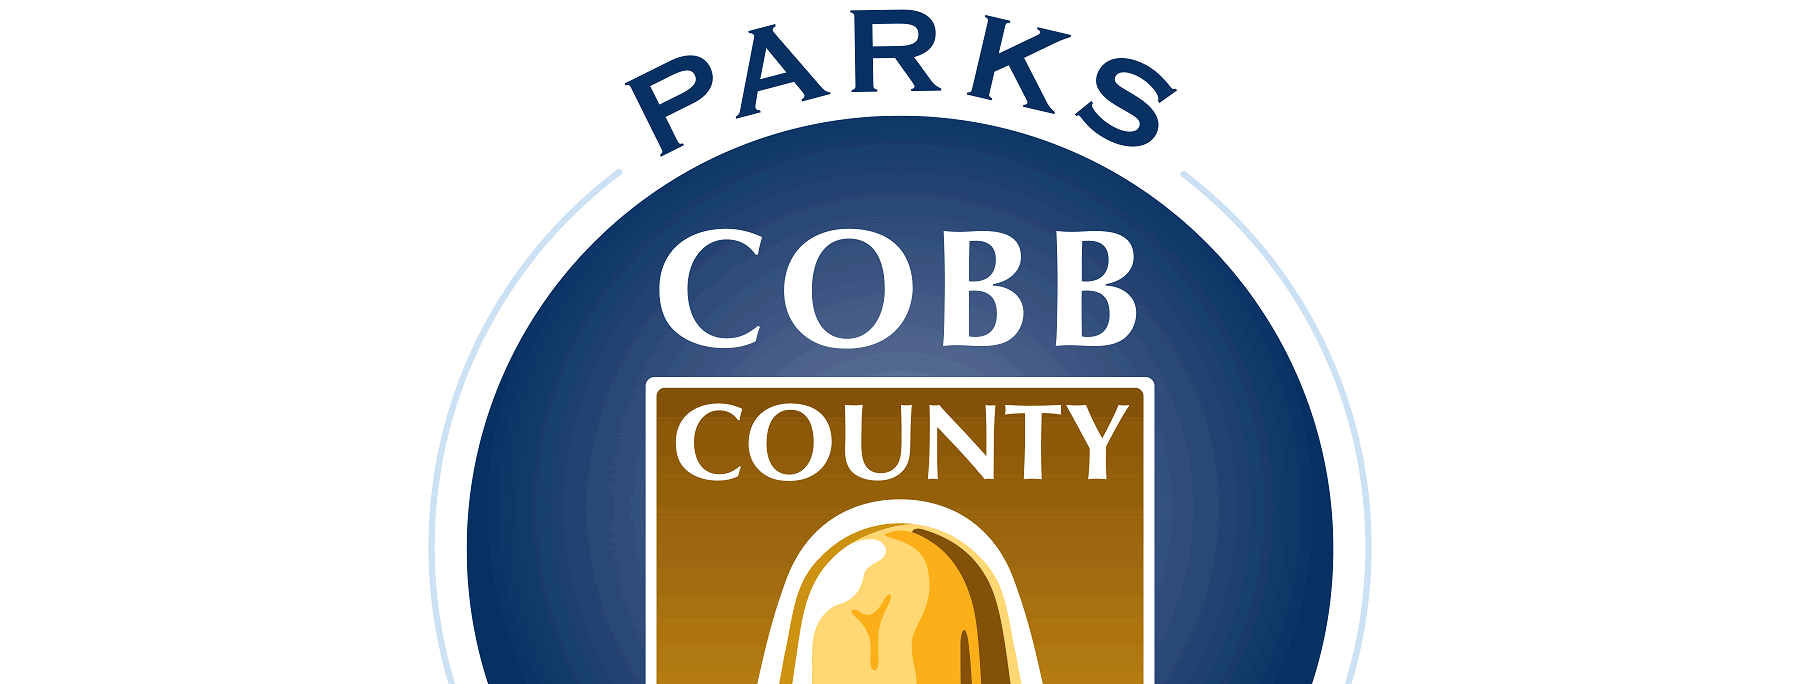 Cobb County Parks, Recreation and Cultural Affairs